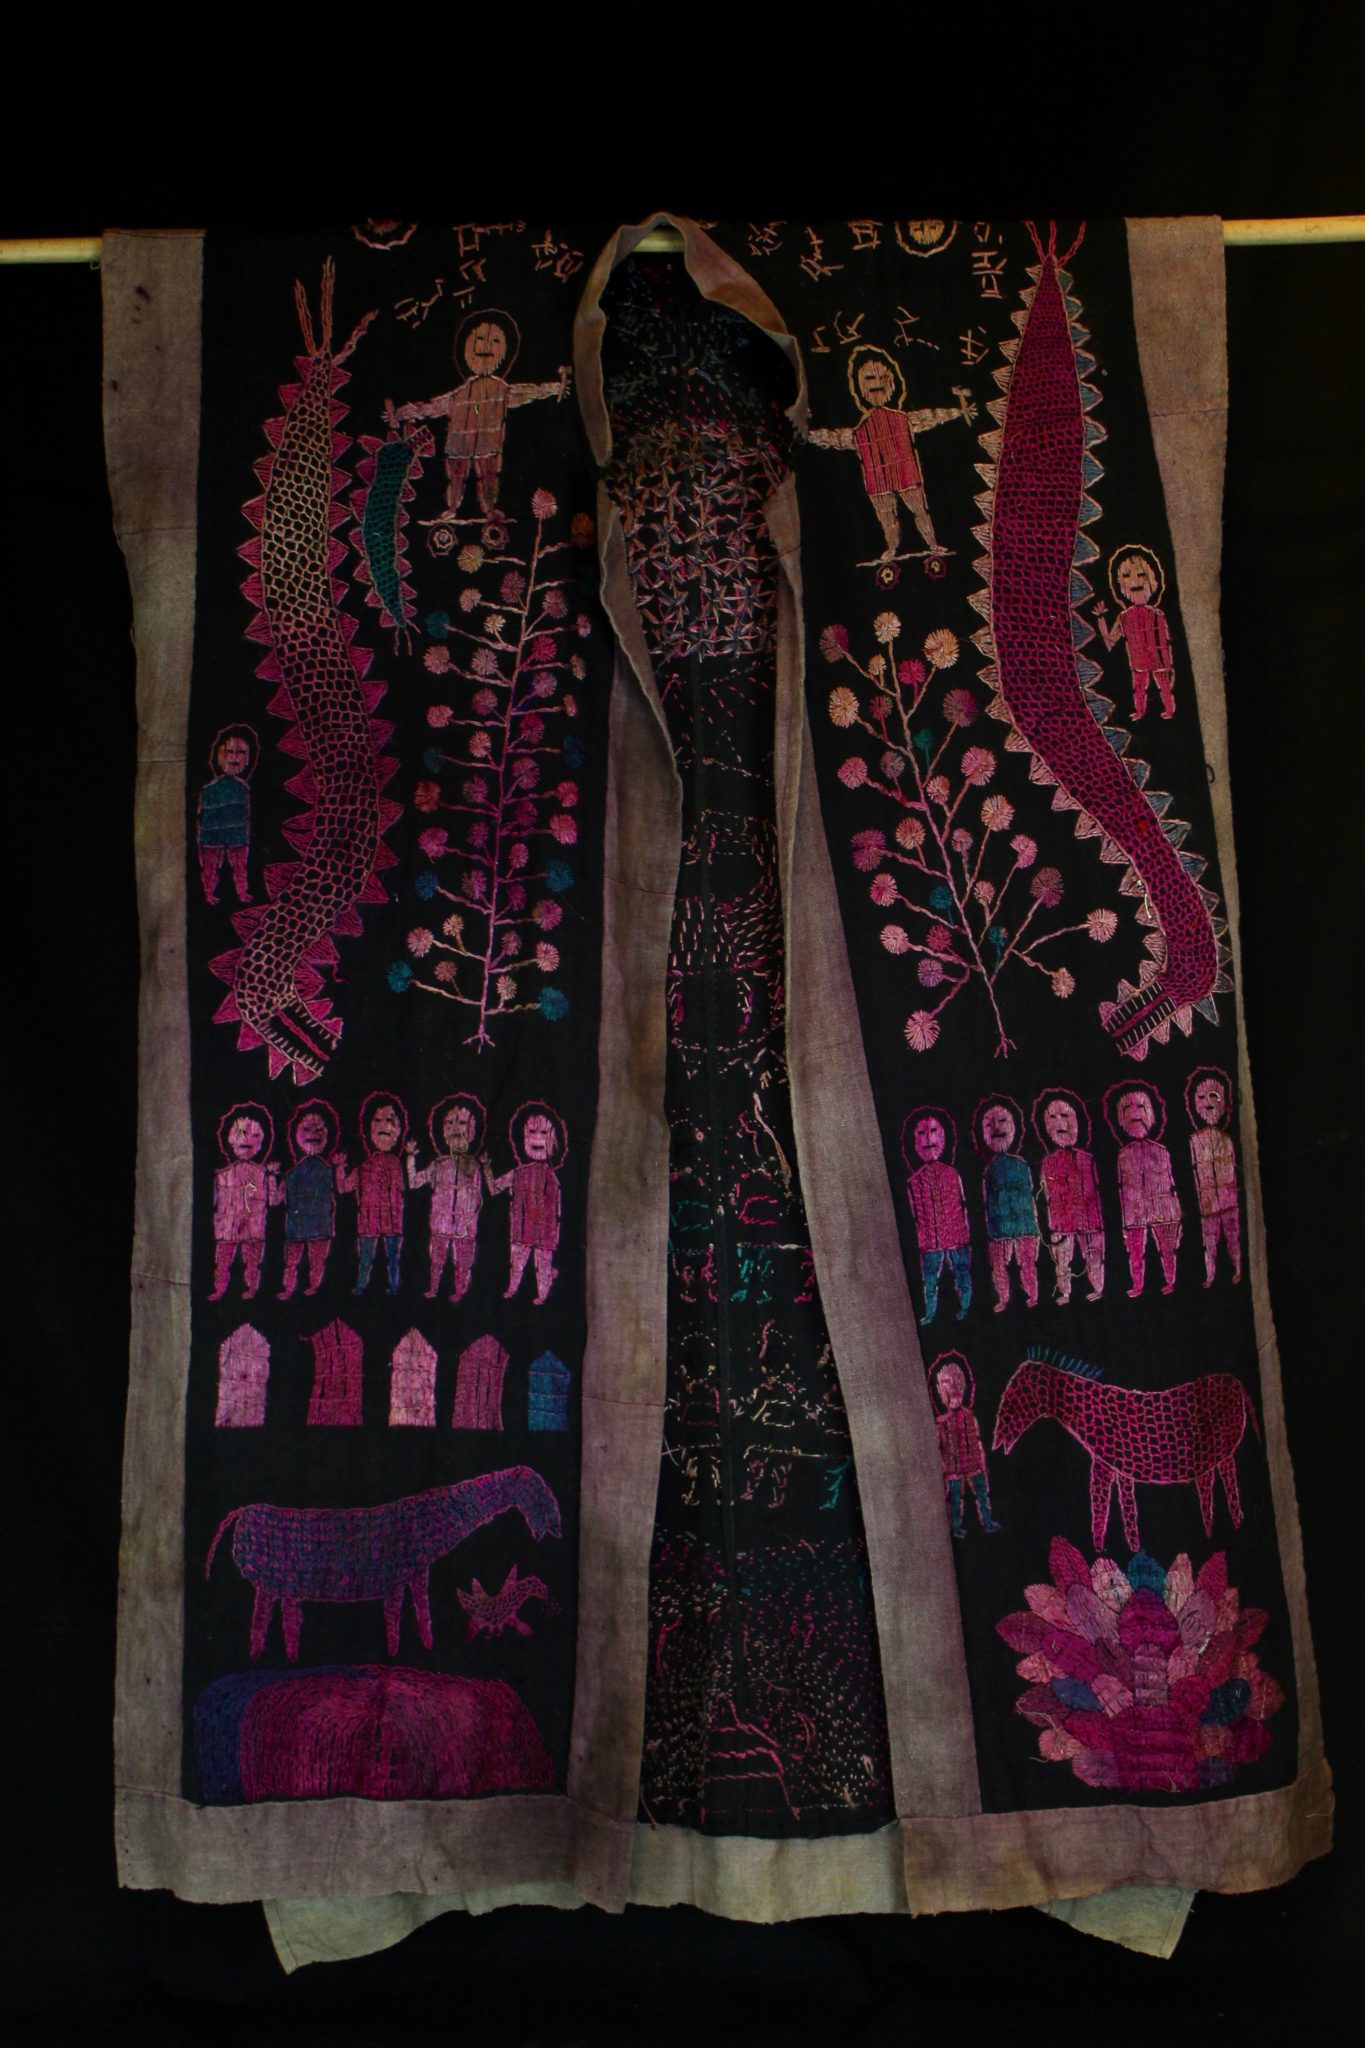 Dragon Robe/Ritual Cloak, Vietnam, (front view) Yao people, Mid 20th c, Cotton, indigo, silk embroidery. Worn only by high level priest/shaman. The motif typically includes all the deities of heaven to clothe the shaman in the universe for protection. Not a vain adornment, it is a reminder of man's place in the hierarchical order. Originally a female costume. Long ago shamans were women and men the providers. Not being encumbered by childbirth and rearing, men replaces women as shamans but retained this part of the sacred costume. 49” x 29”, $2200.